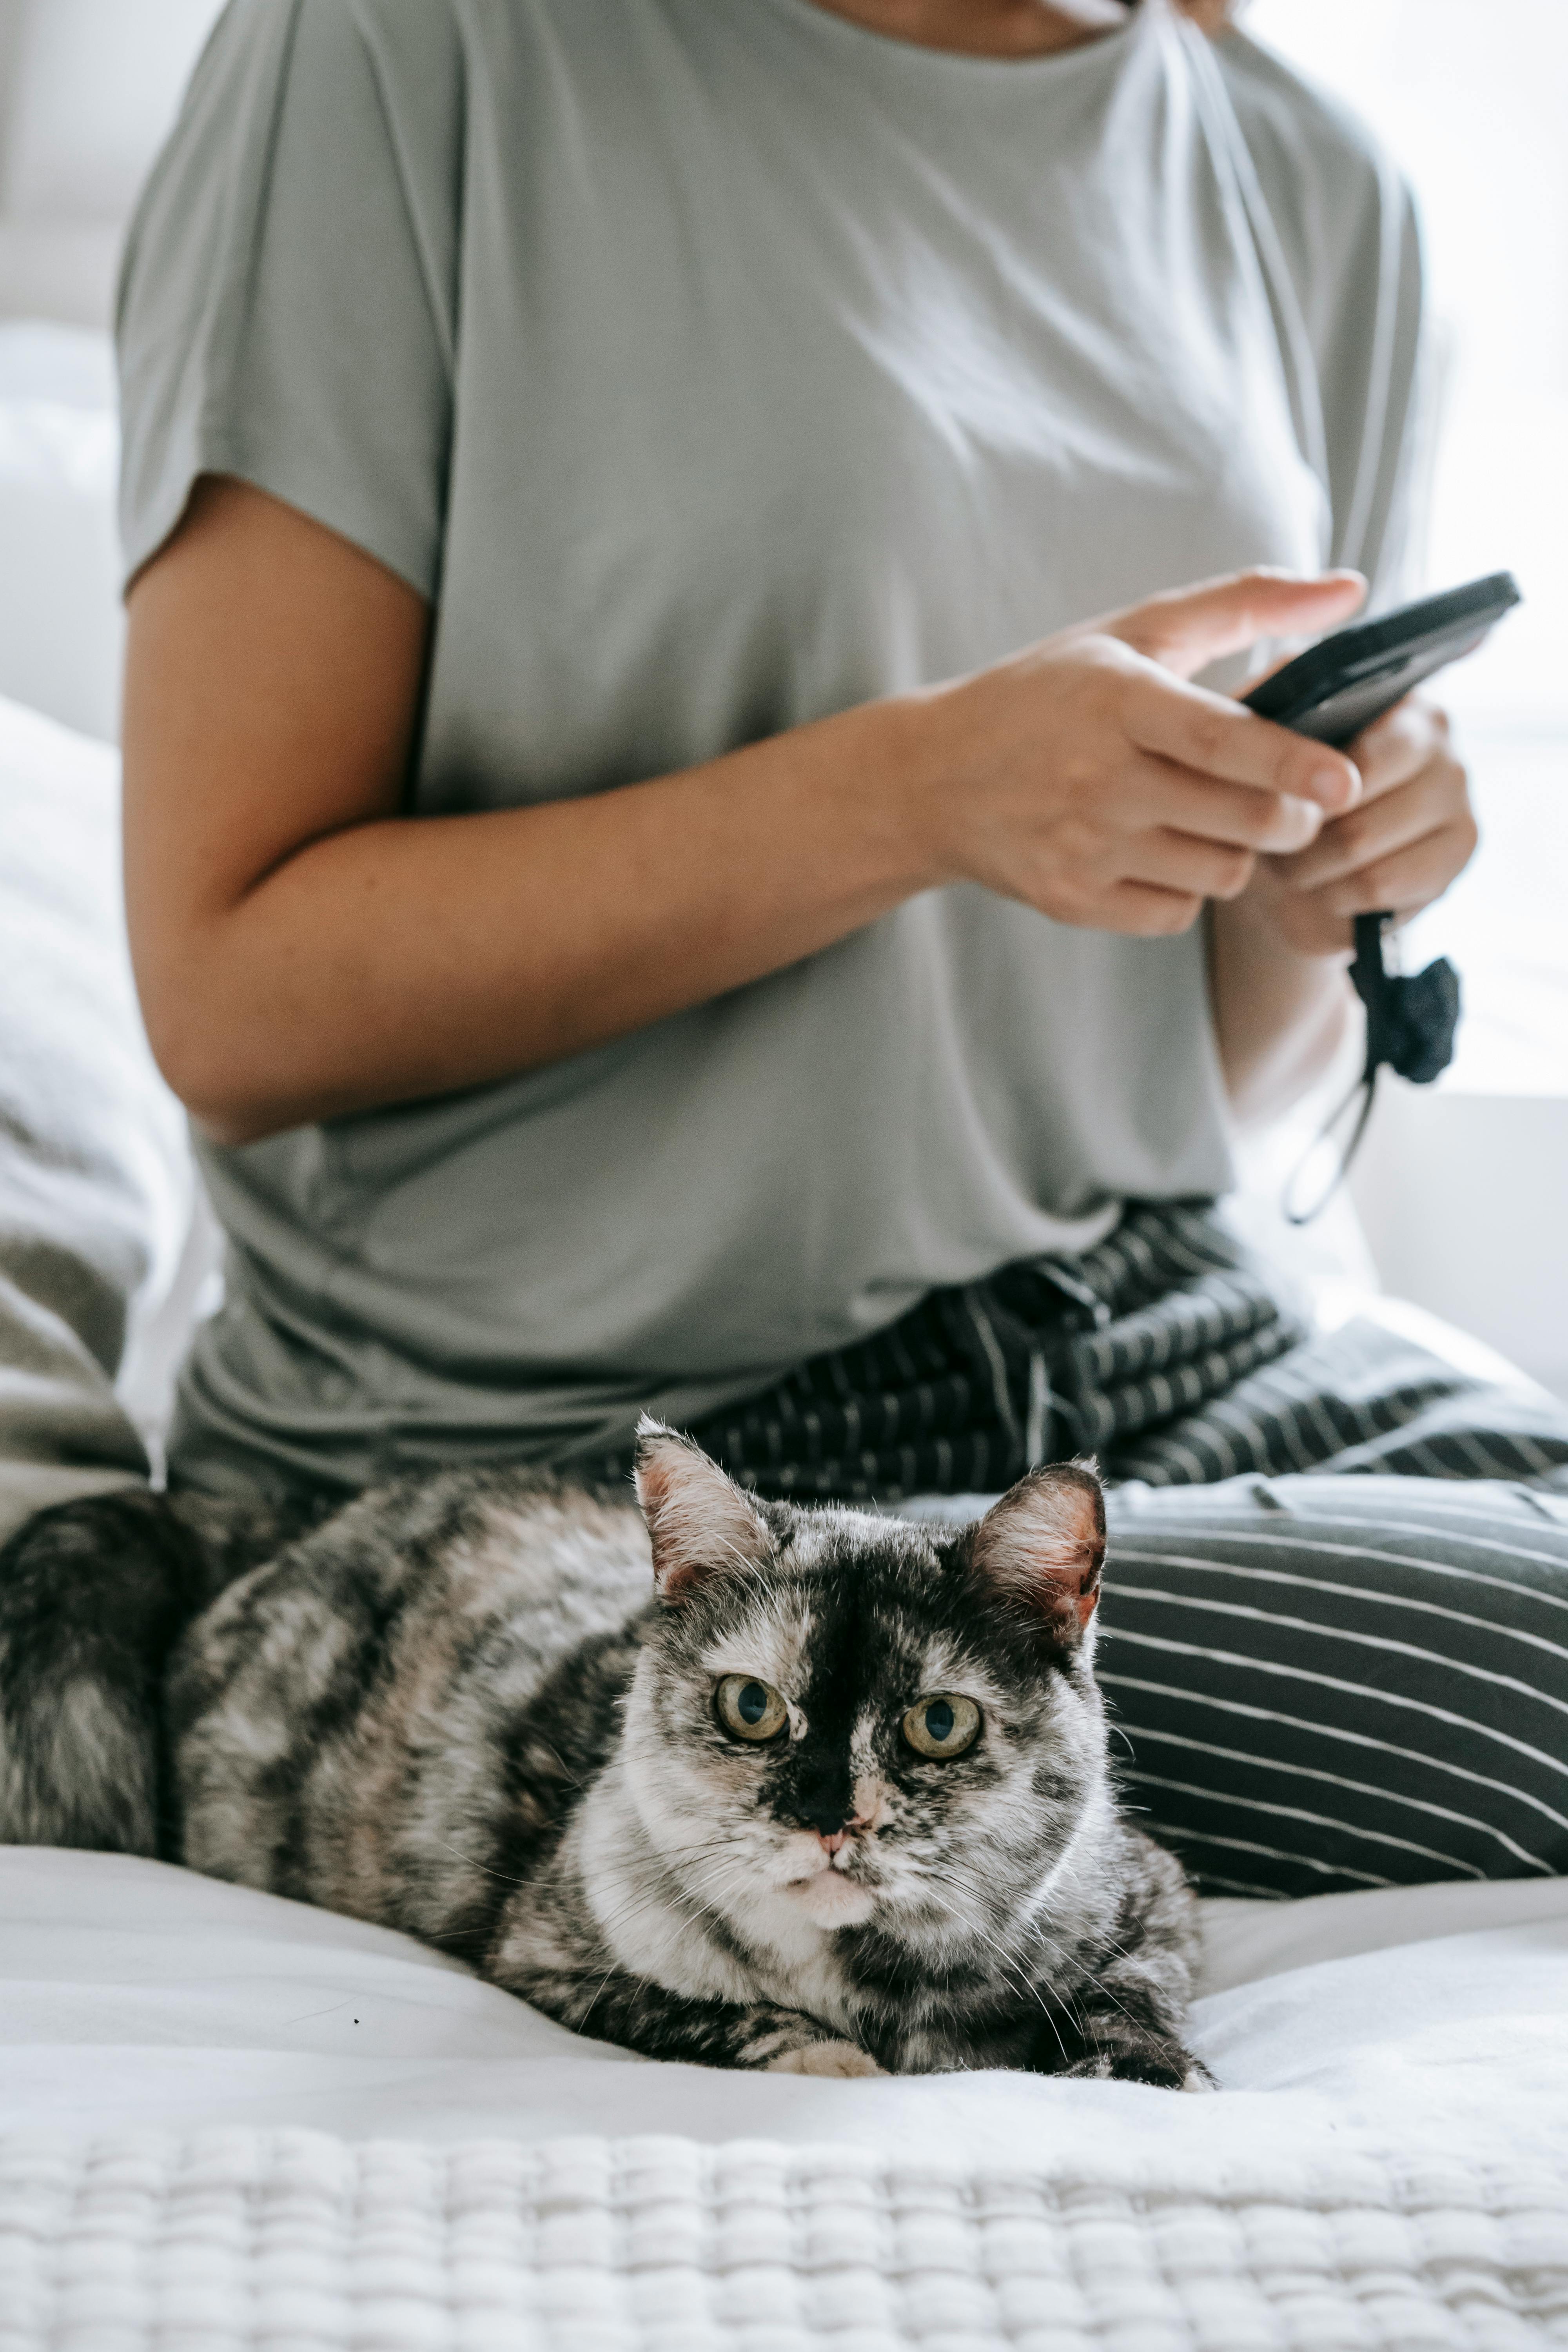 anonymous woman browsing smartphone while sitting on bed near cute cat